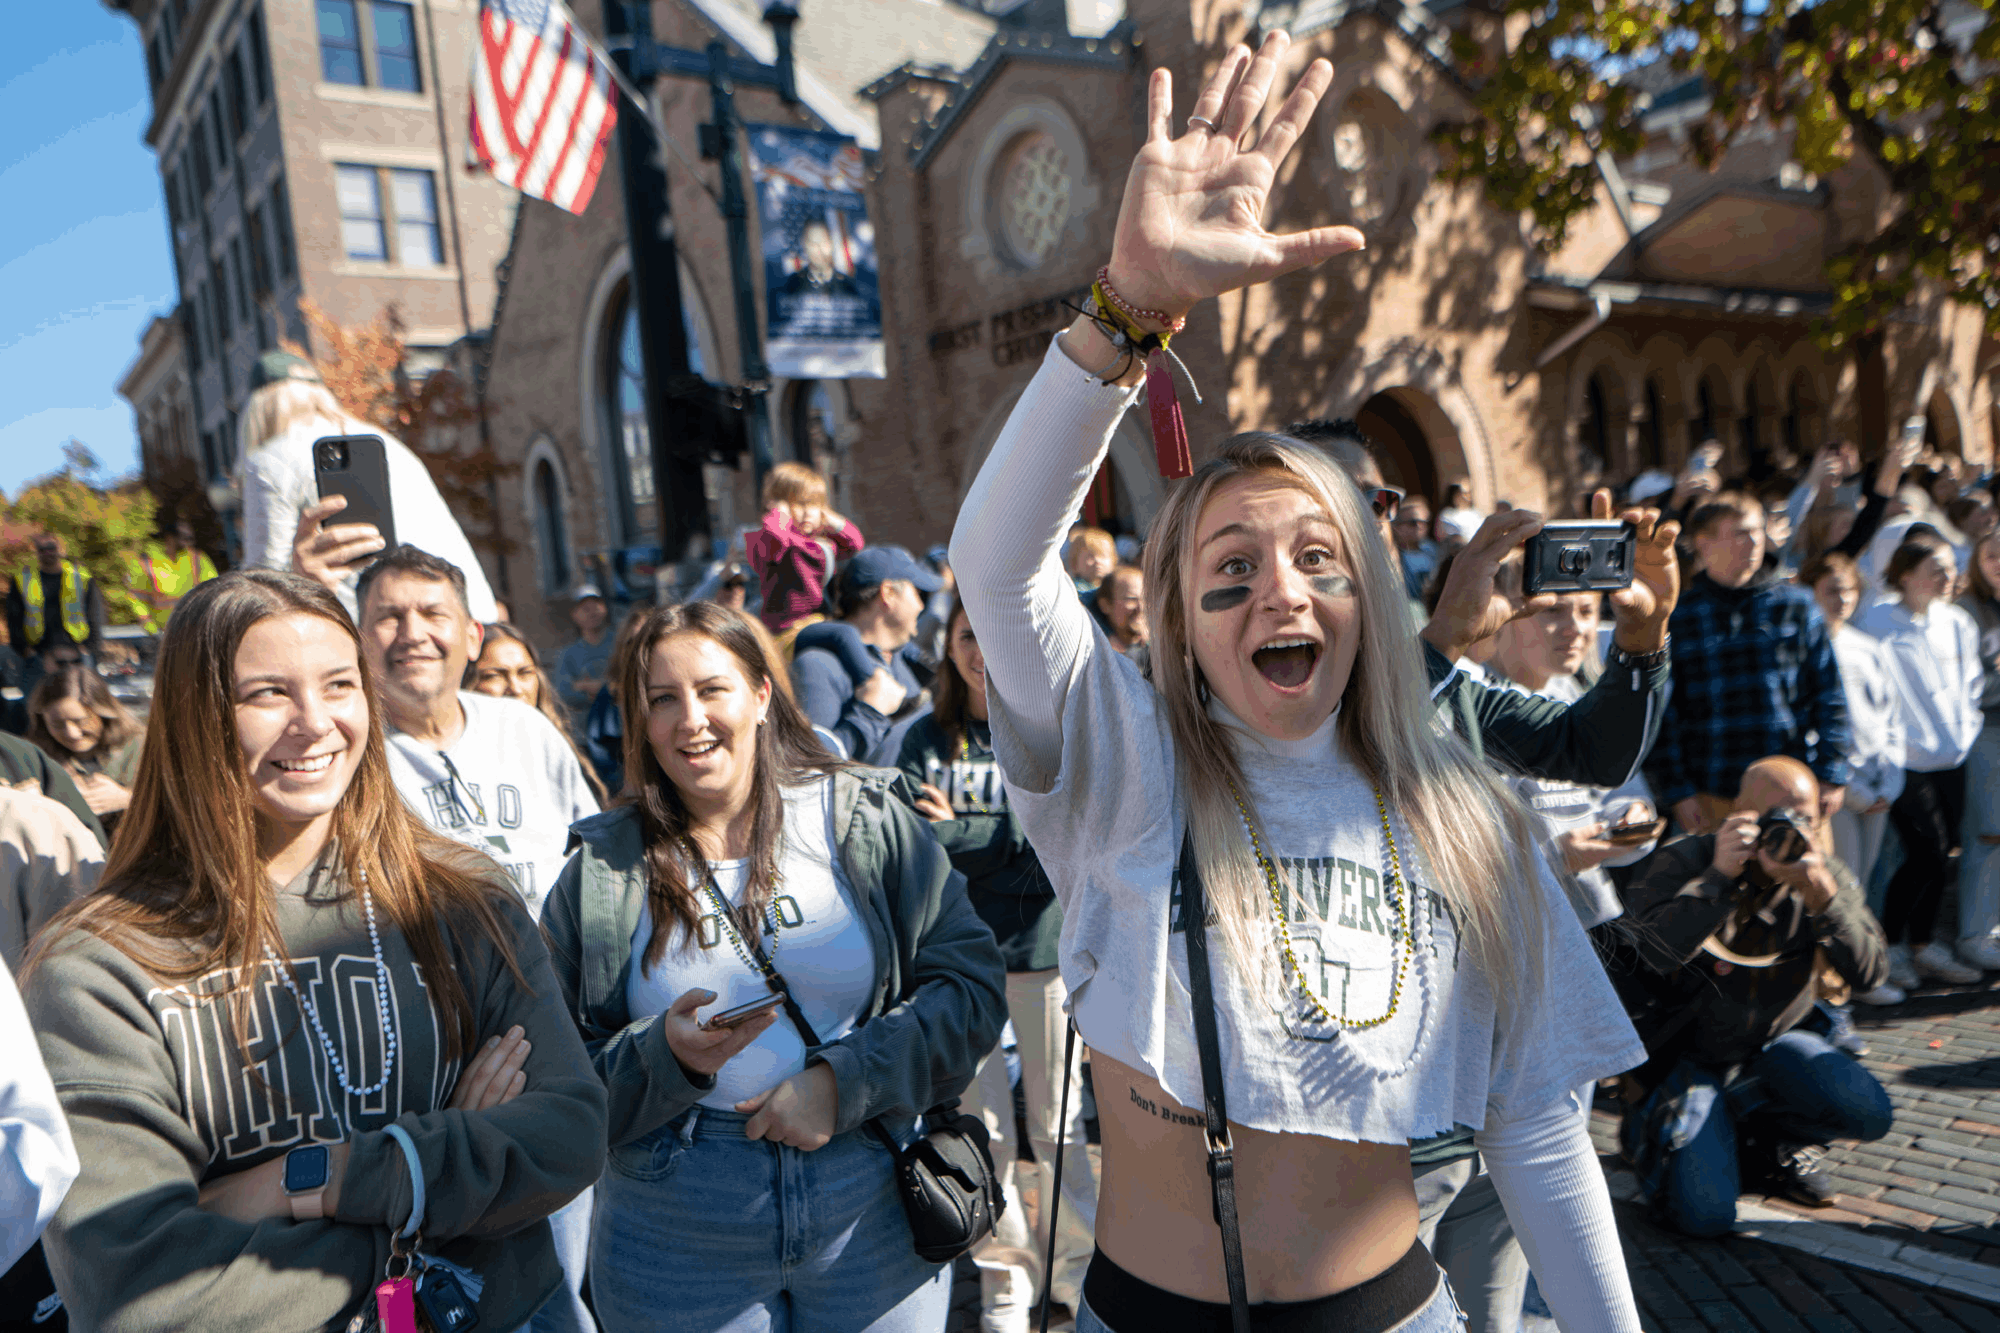 There was a lot of raising – and wearing – the Green and White during Homecoming 2022 as Bobcats past, present and future celebrated the ties, and place, that bind them to one another.